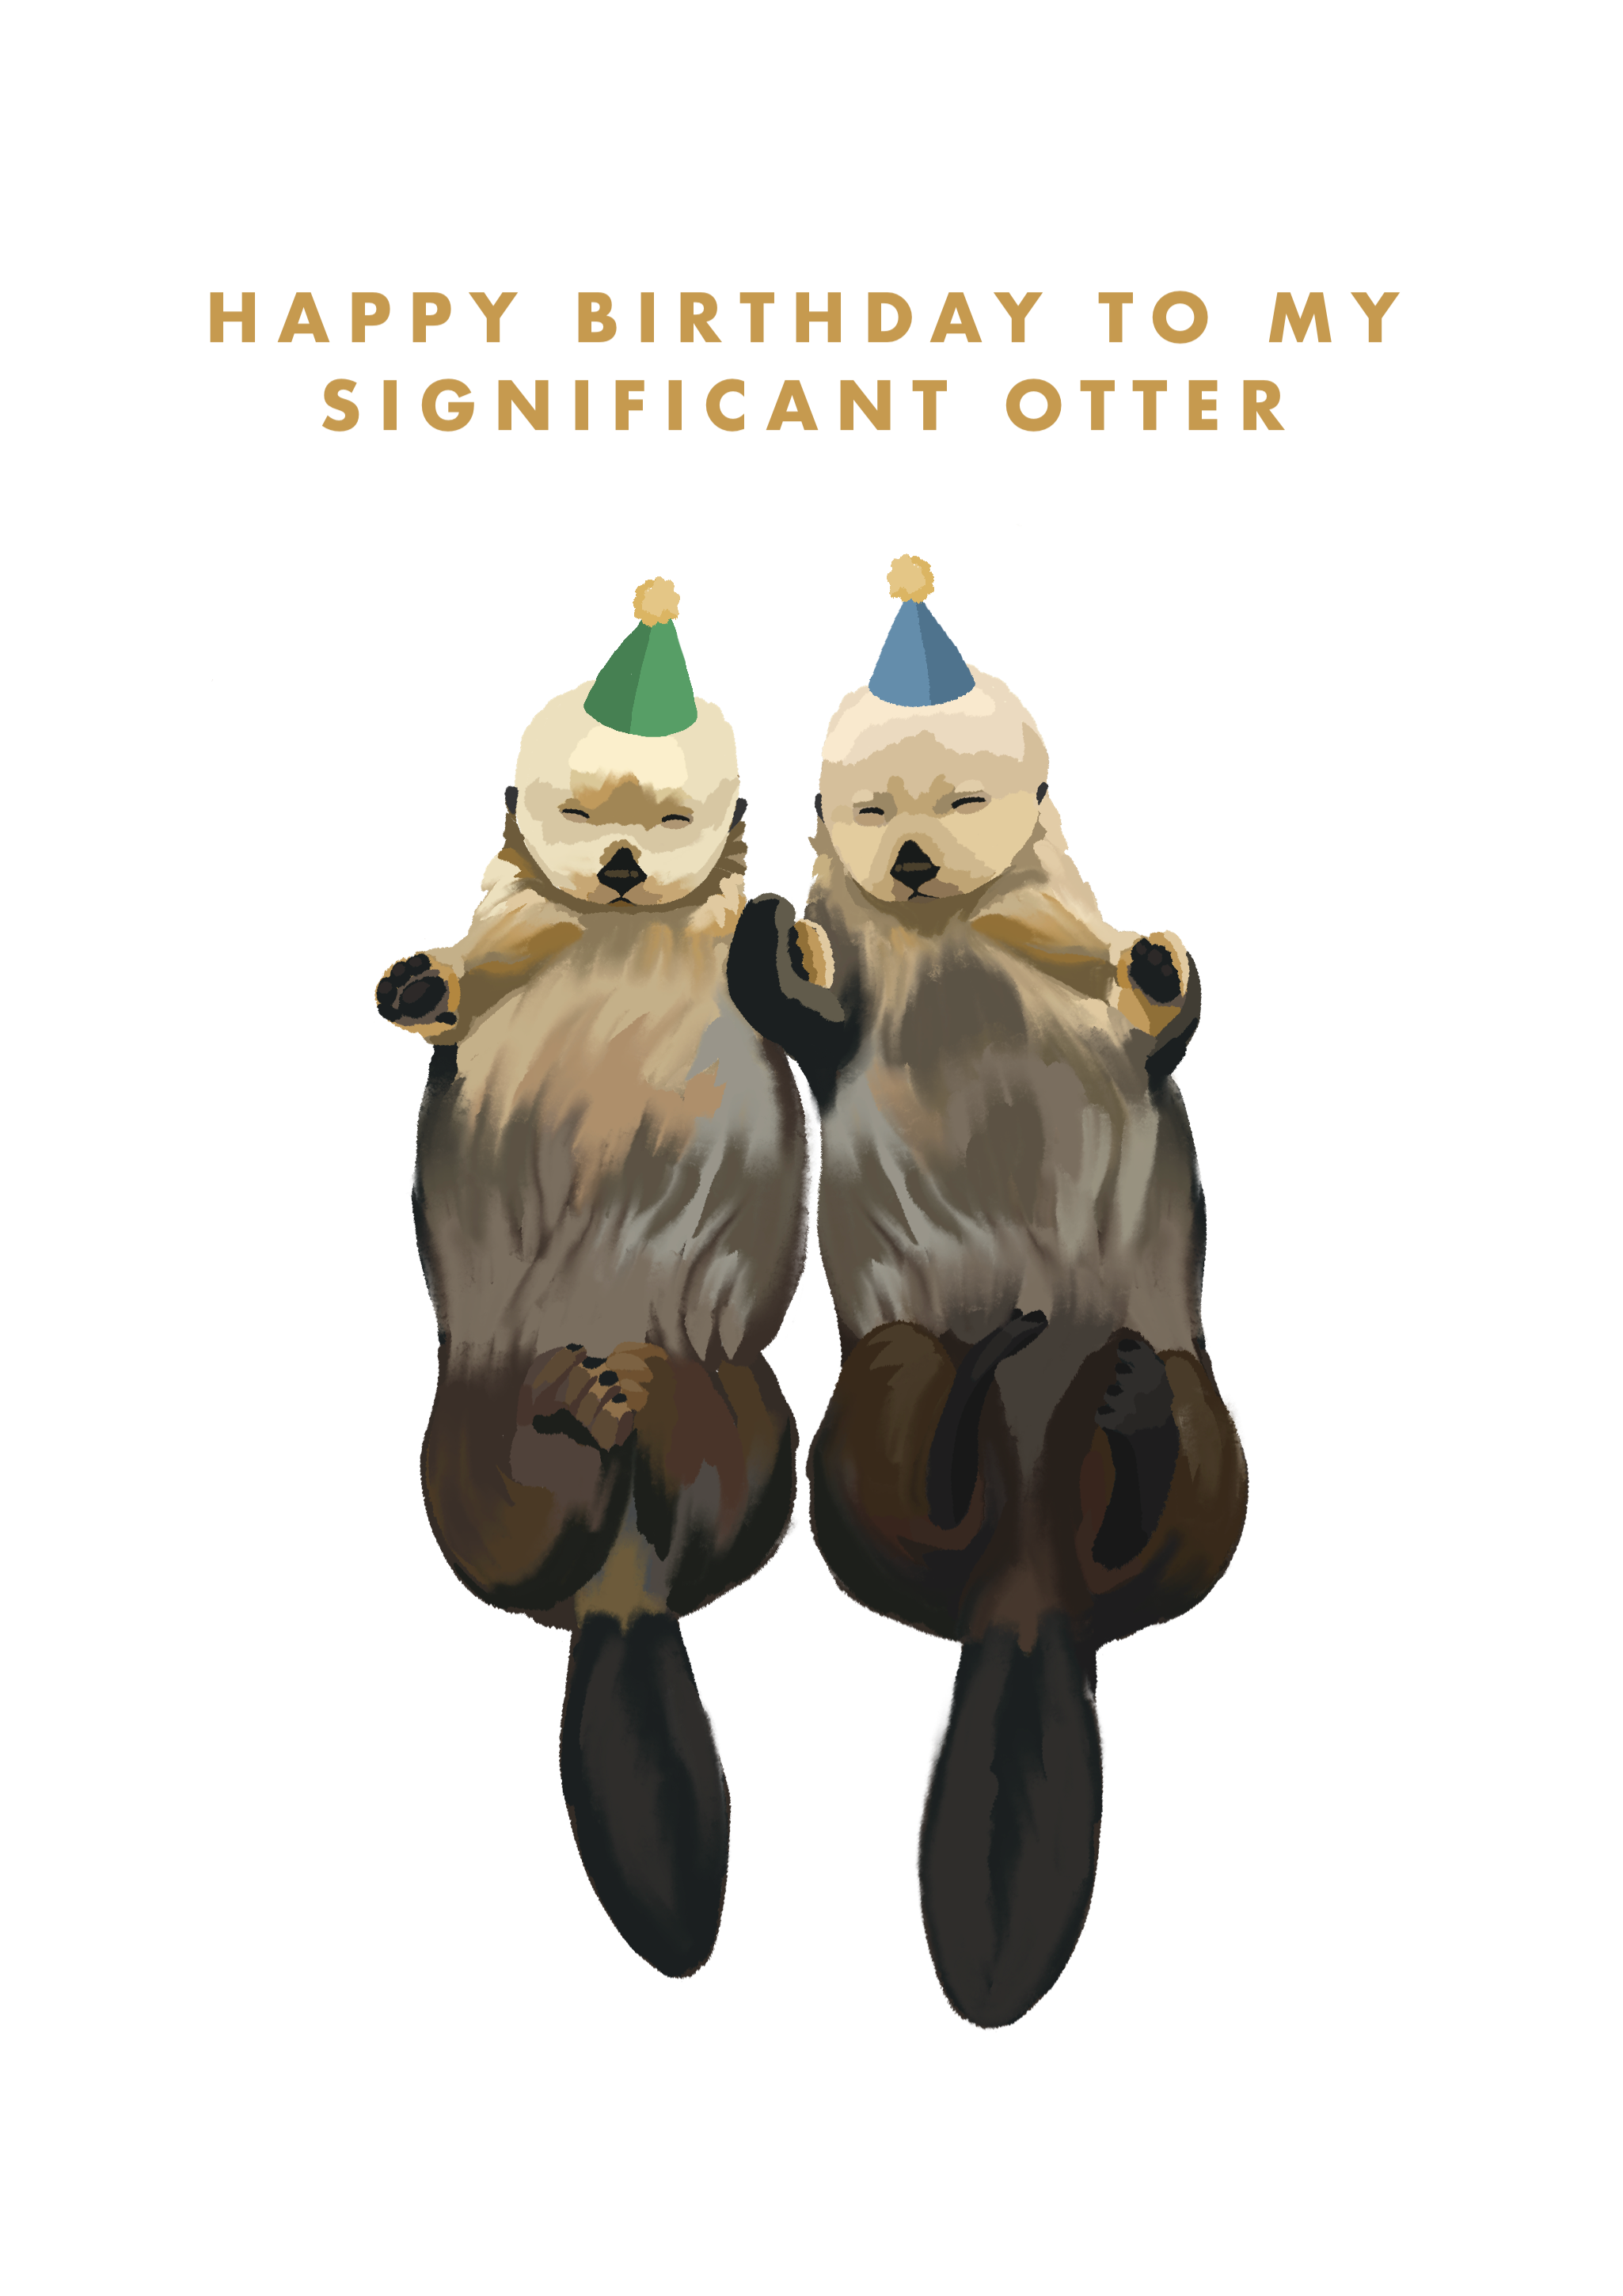 Significant Otter – WishBird